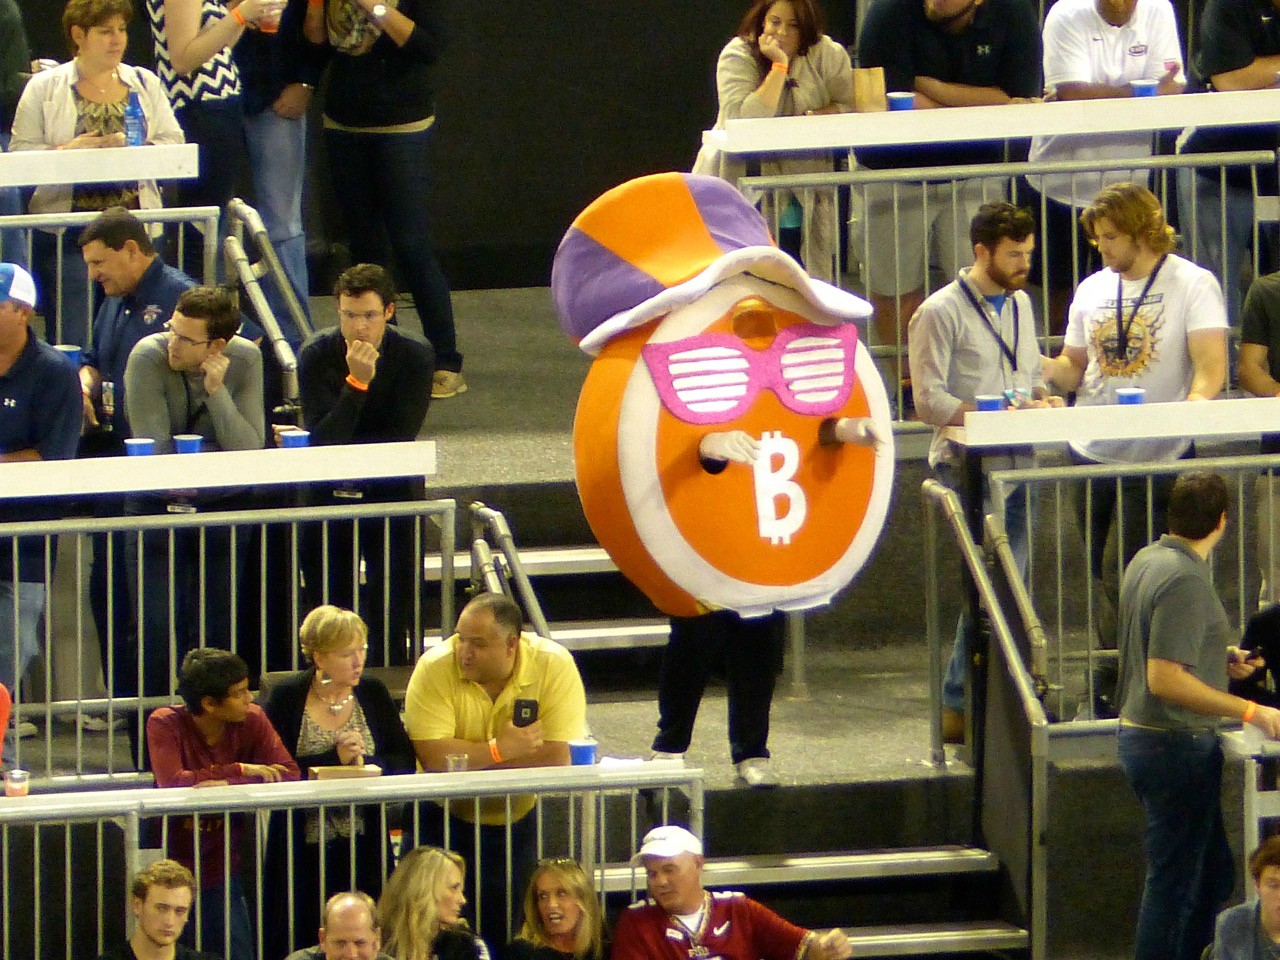 The Bitcoin Bowl really did happen and we had someone at the game.